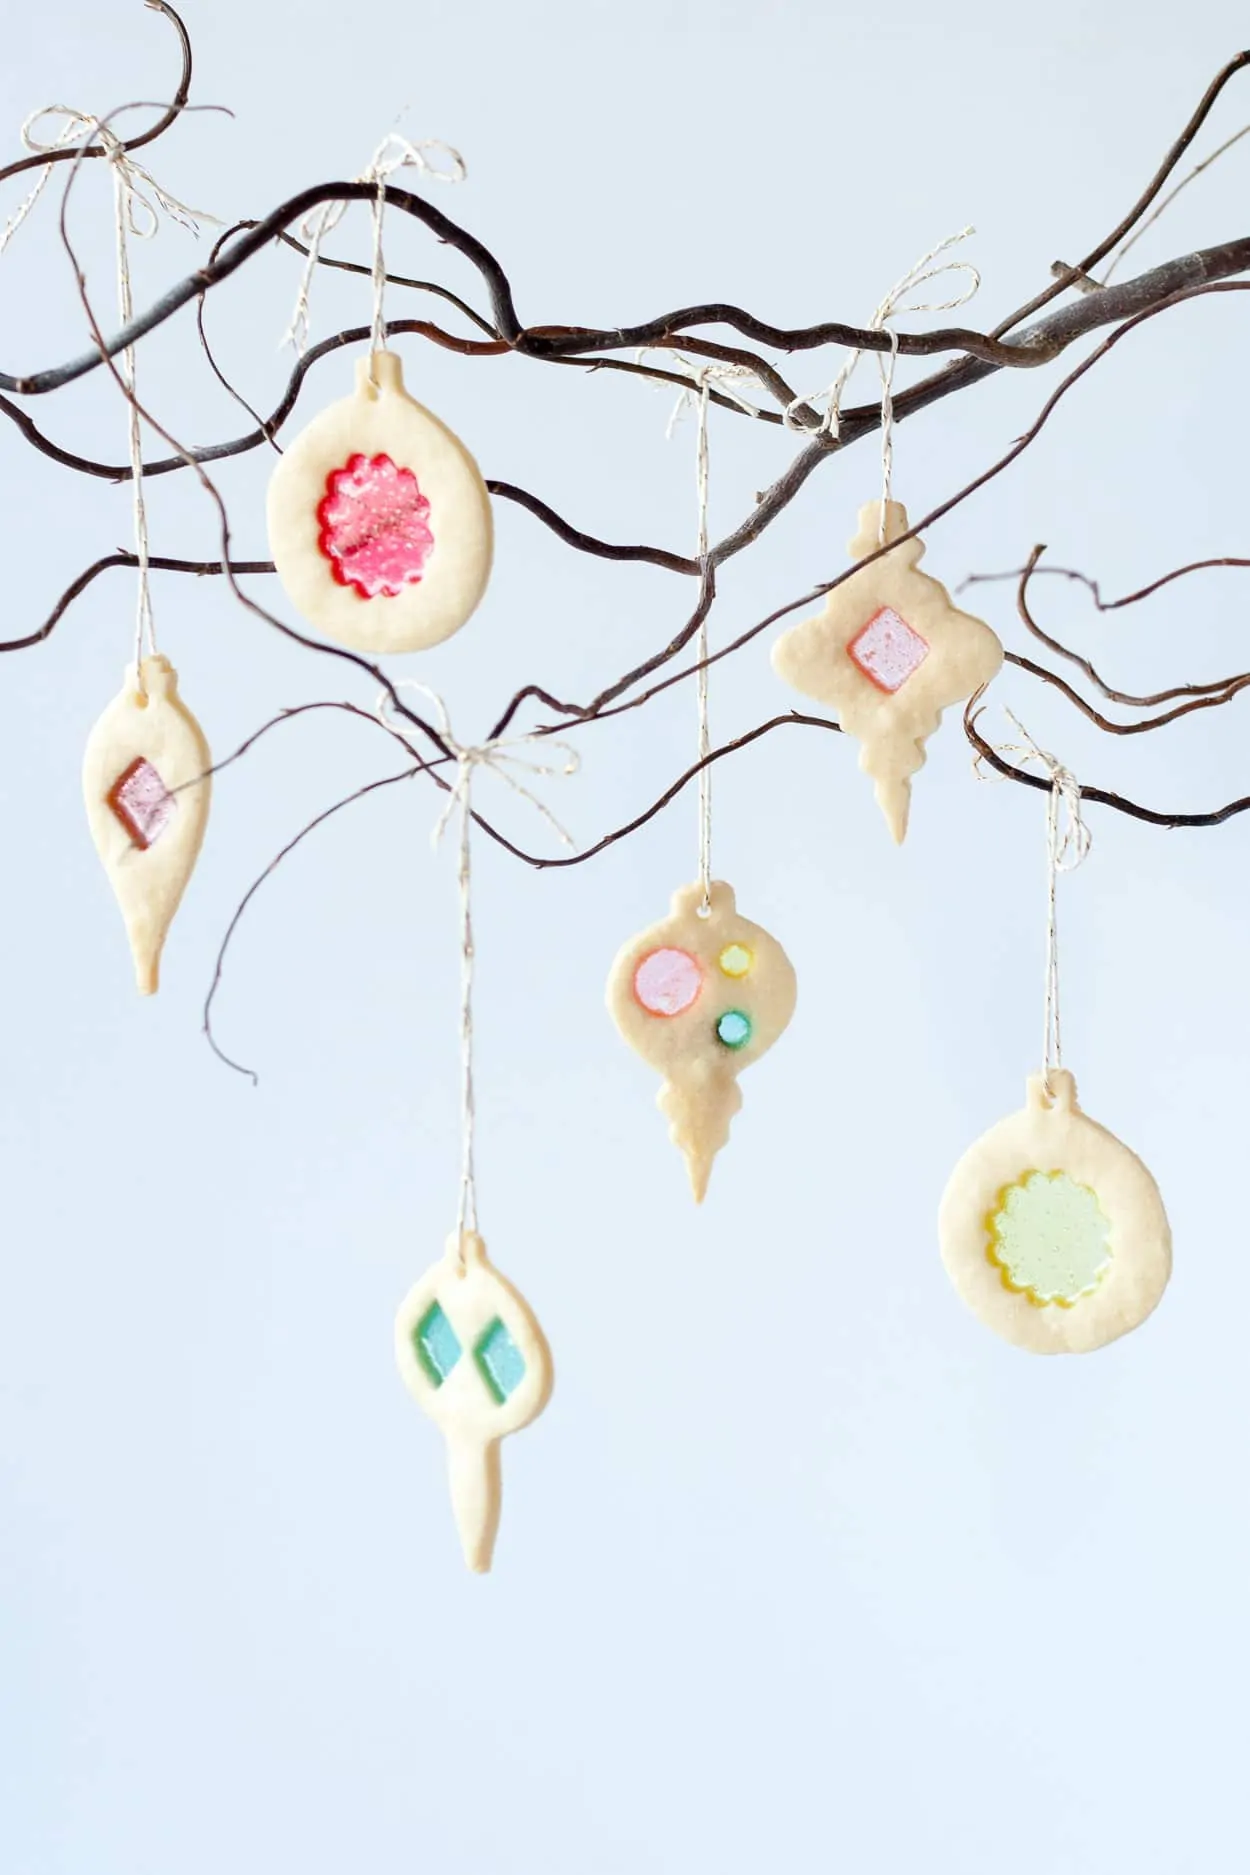 Stained glass Christmas decorated cookies hanging from branch